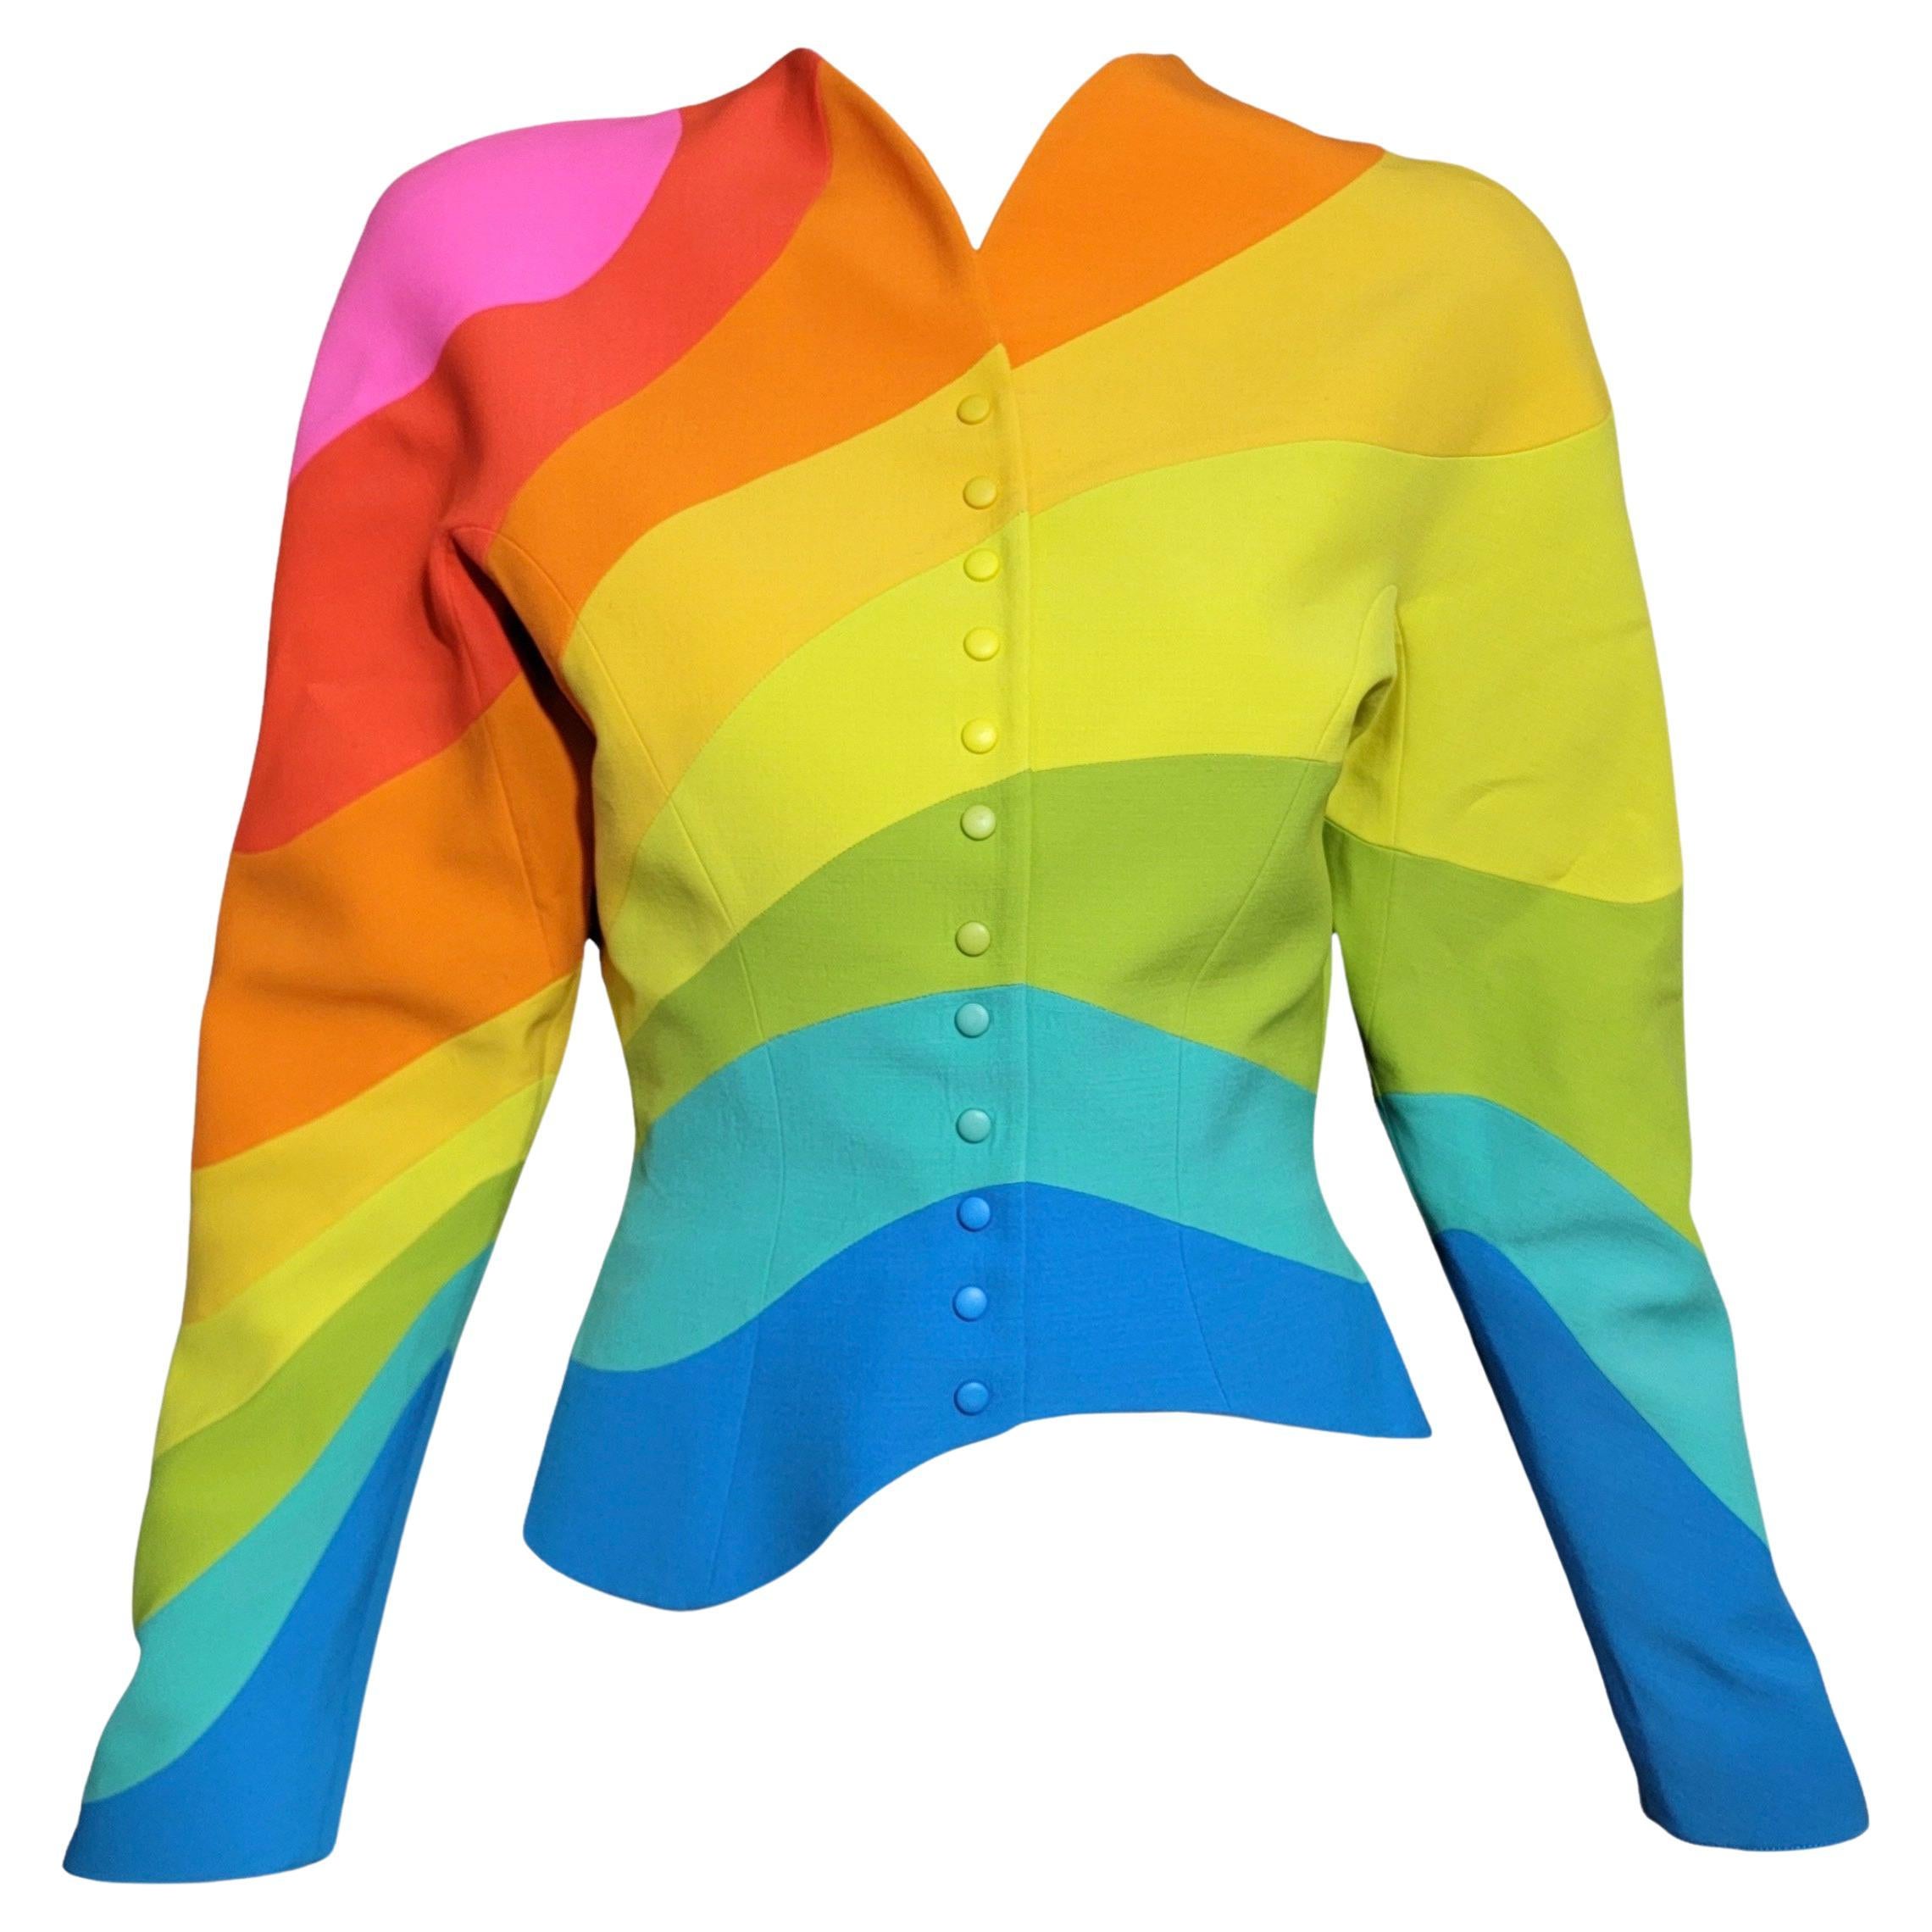 S/S 1990 Thierry Mugler Iconic Rainbow Structured Runway Jacket  For Sale